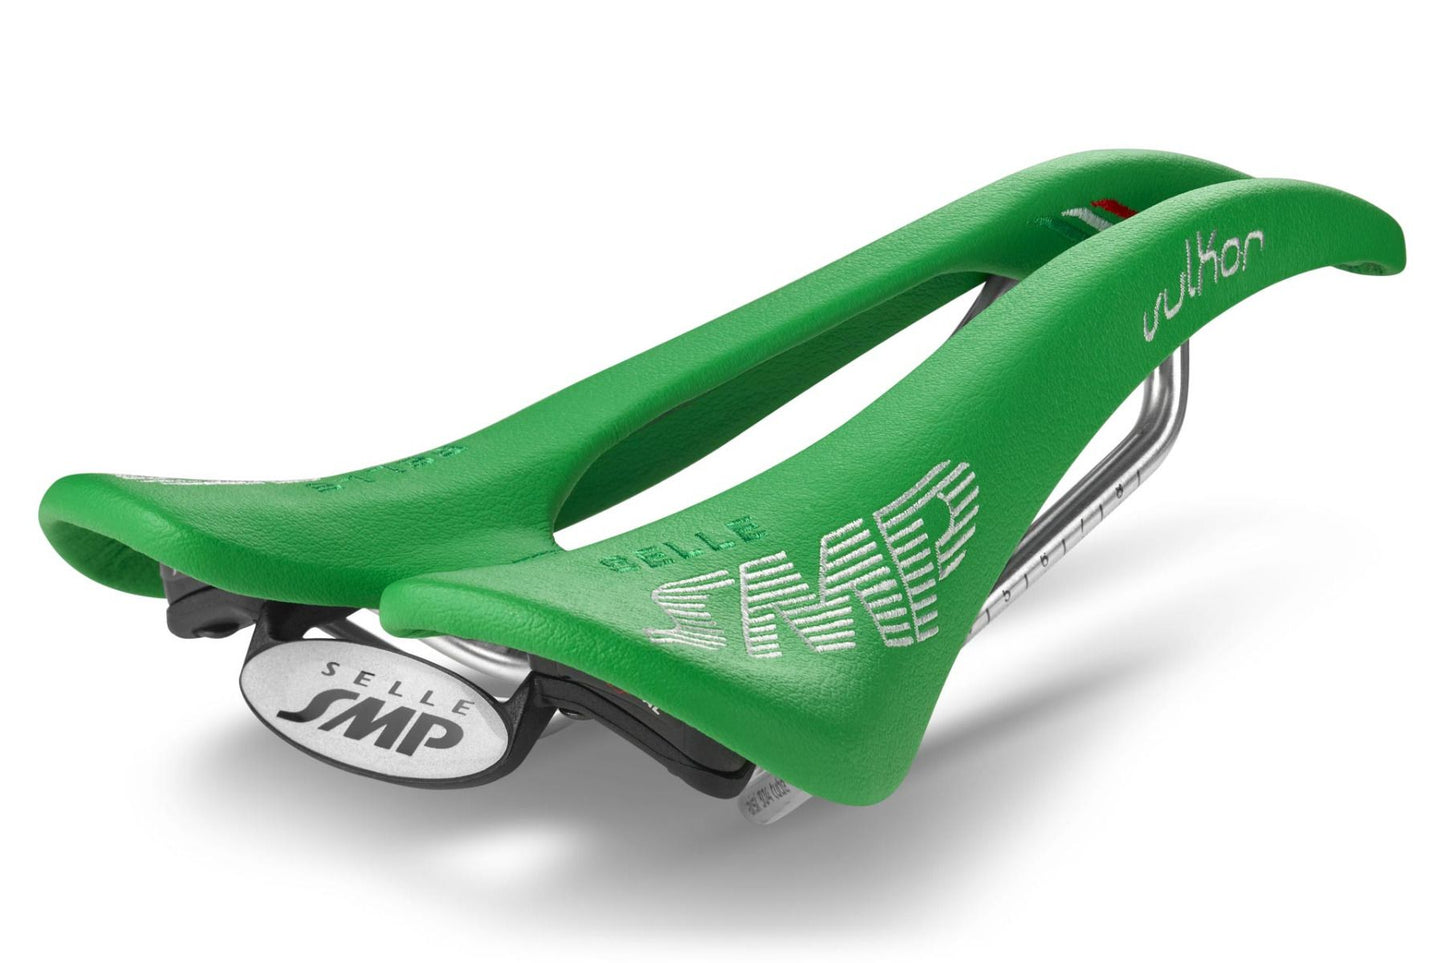 Selle SMP Vulkor Saddle with Steel Rails (Green)